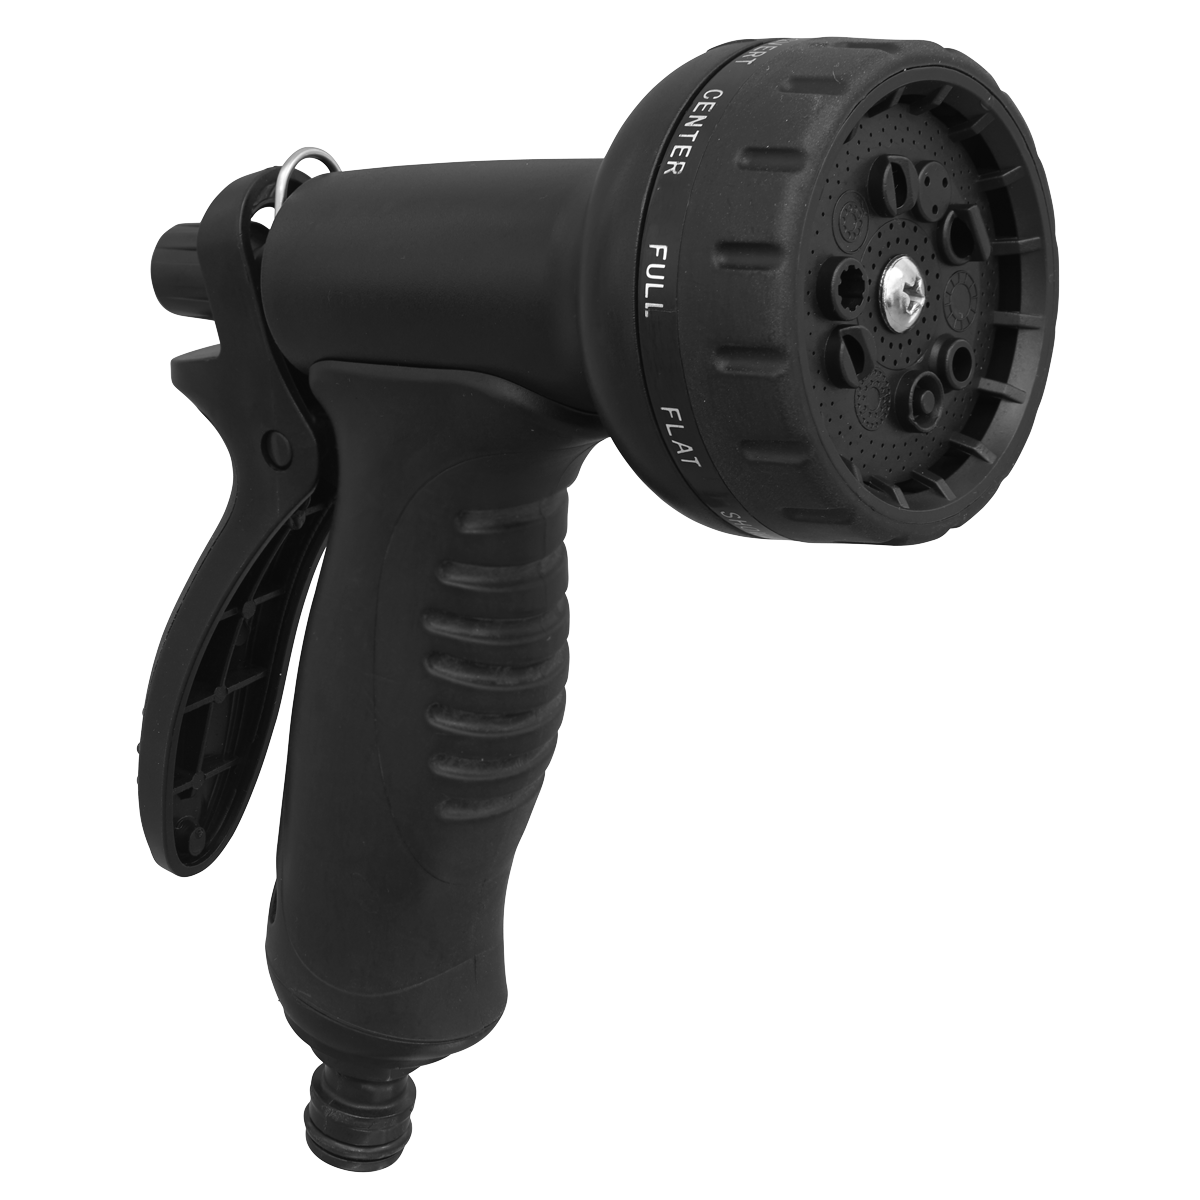 SPRAY NOZZLE – Features comfortable trigger and handle as well as 10 different settings to suit a variety tasks.